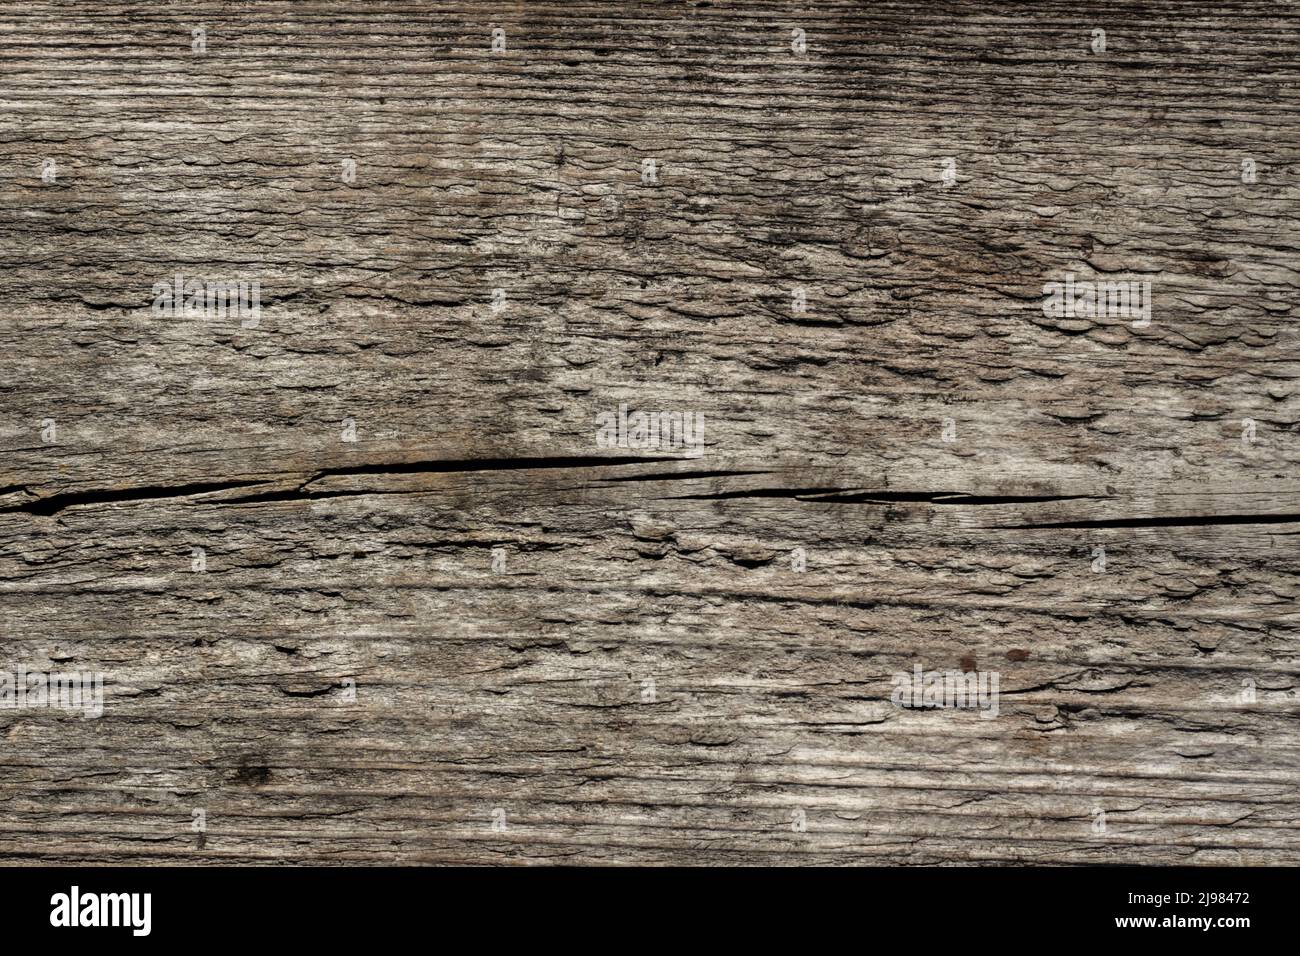 The brown old wood texture. Pine, design. Stock Photo